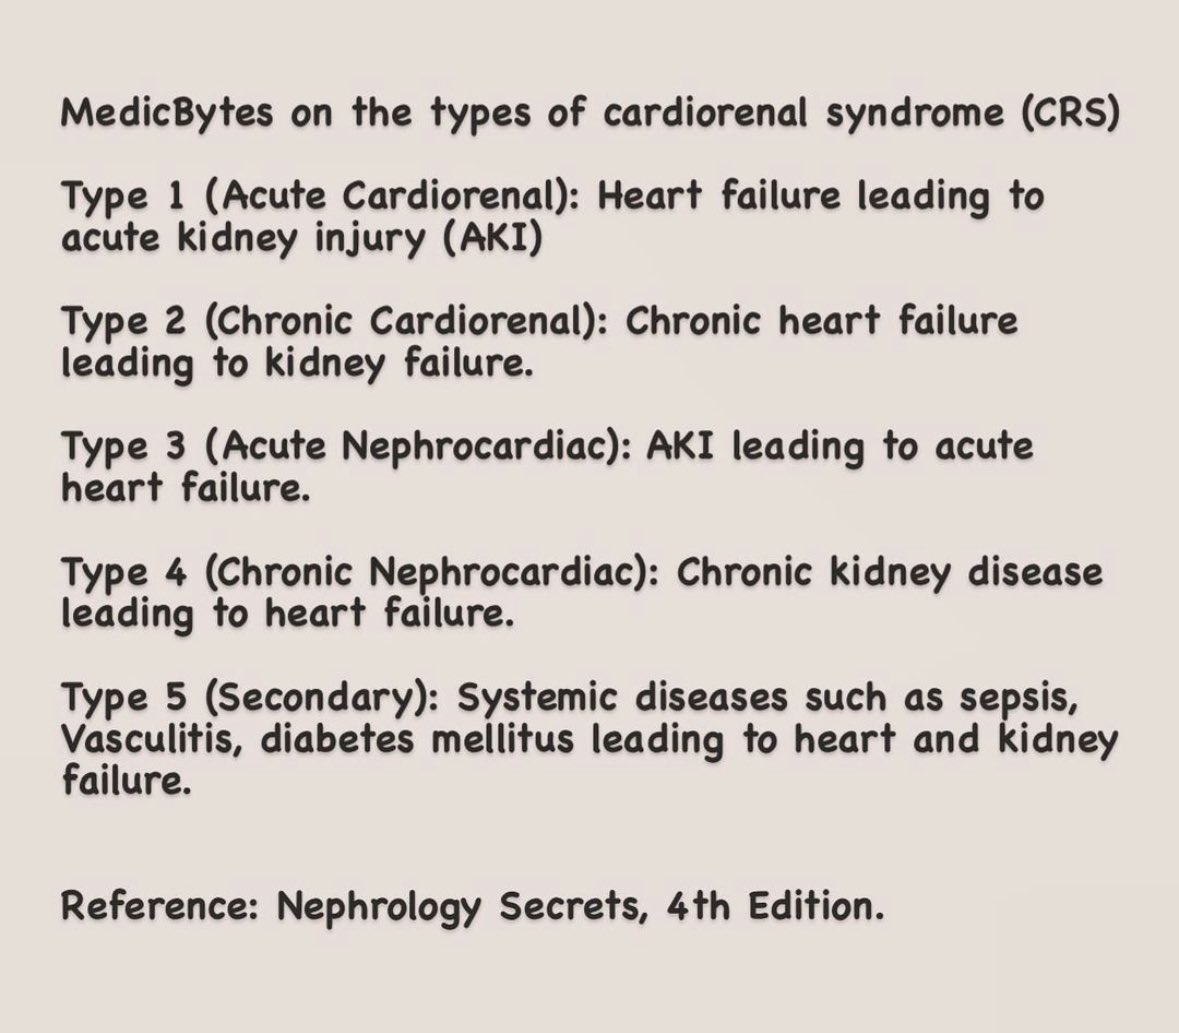 Let's review the different types of cardiorenal syndromes that occur when the harmony between the heart and kidneys is disrupted. Thank you, @Nischistocyte, for the informative bites!#MedicBytes #MedTwitter #InternalMedicine